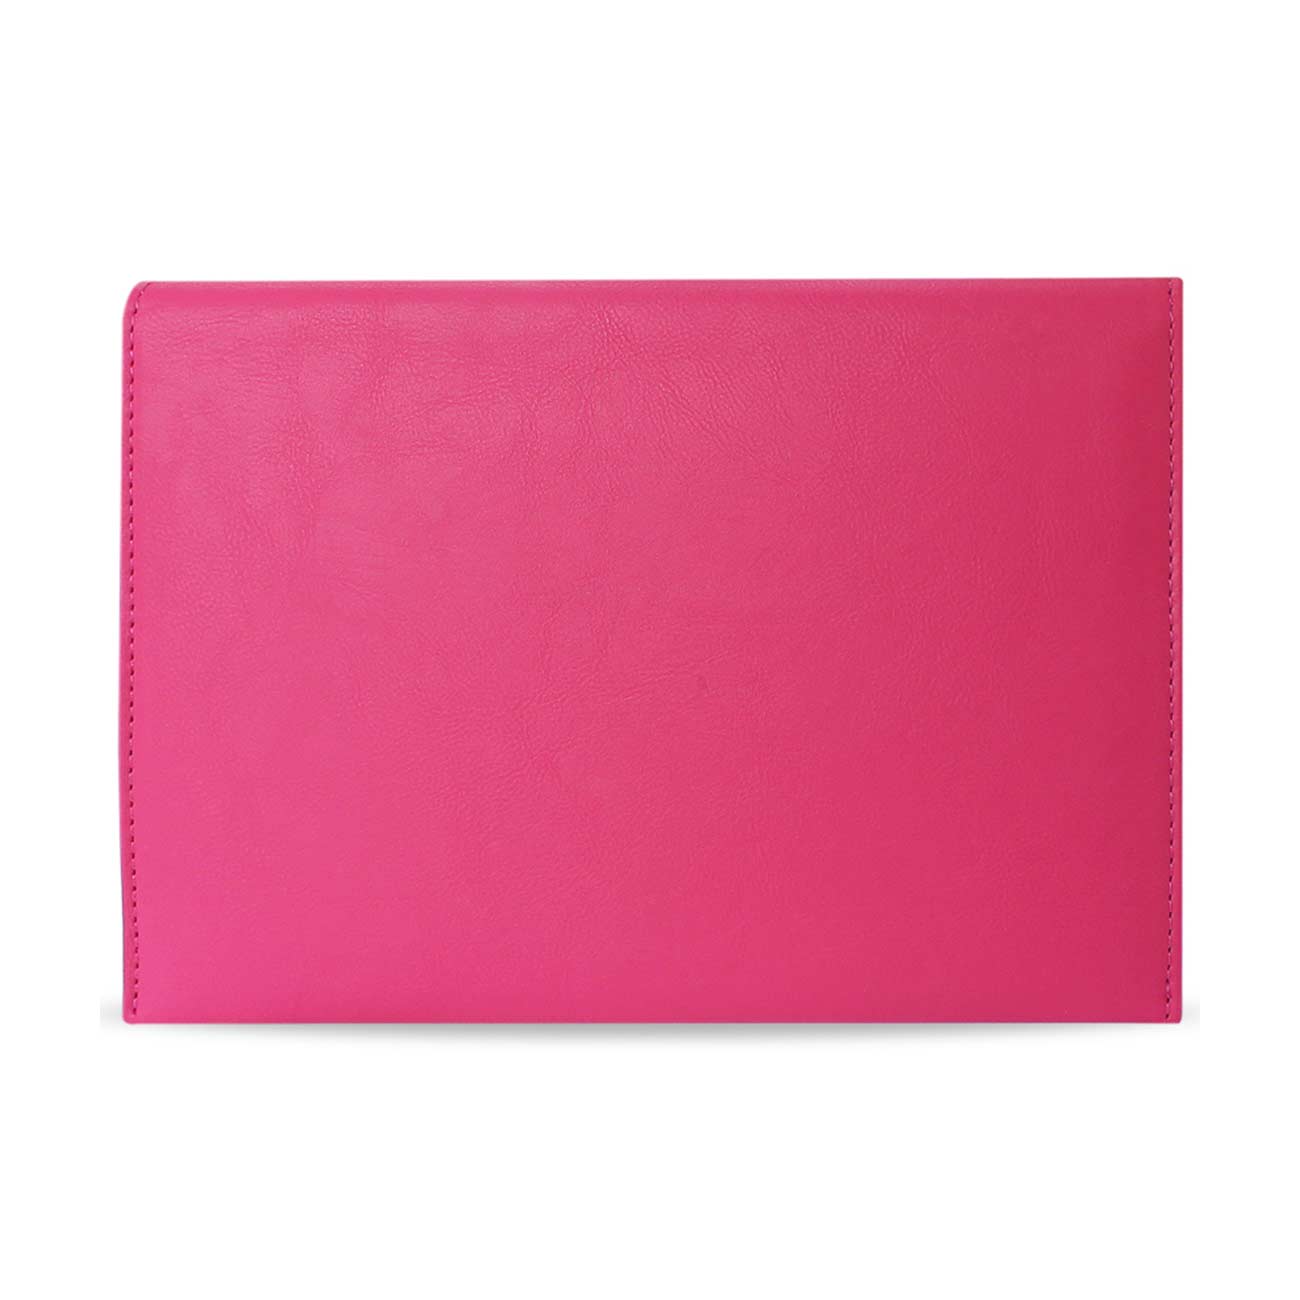 REIKO PREMIUM LEATHER CASE POUCH FOR 8.2INCHES IPADS AND TABLETS In HOT PINK